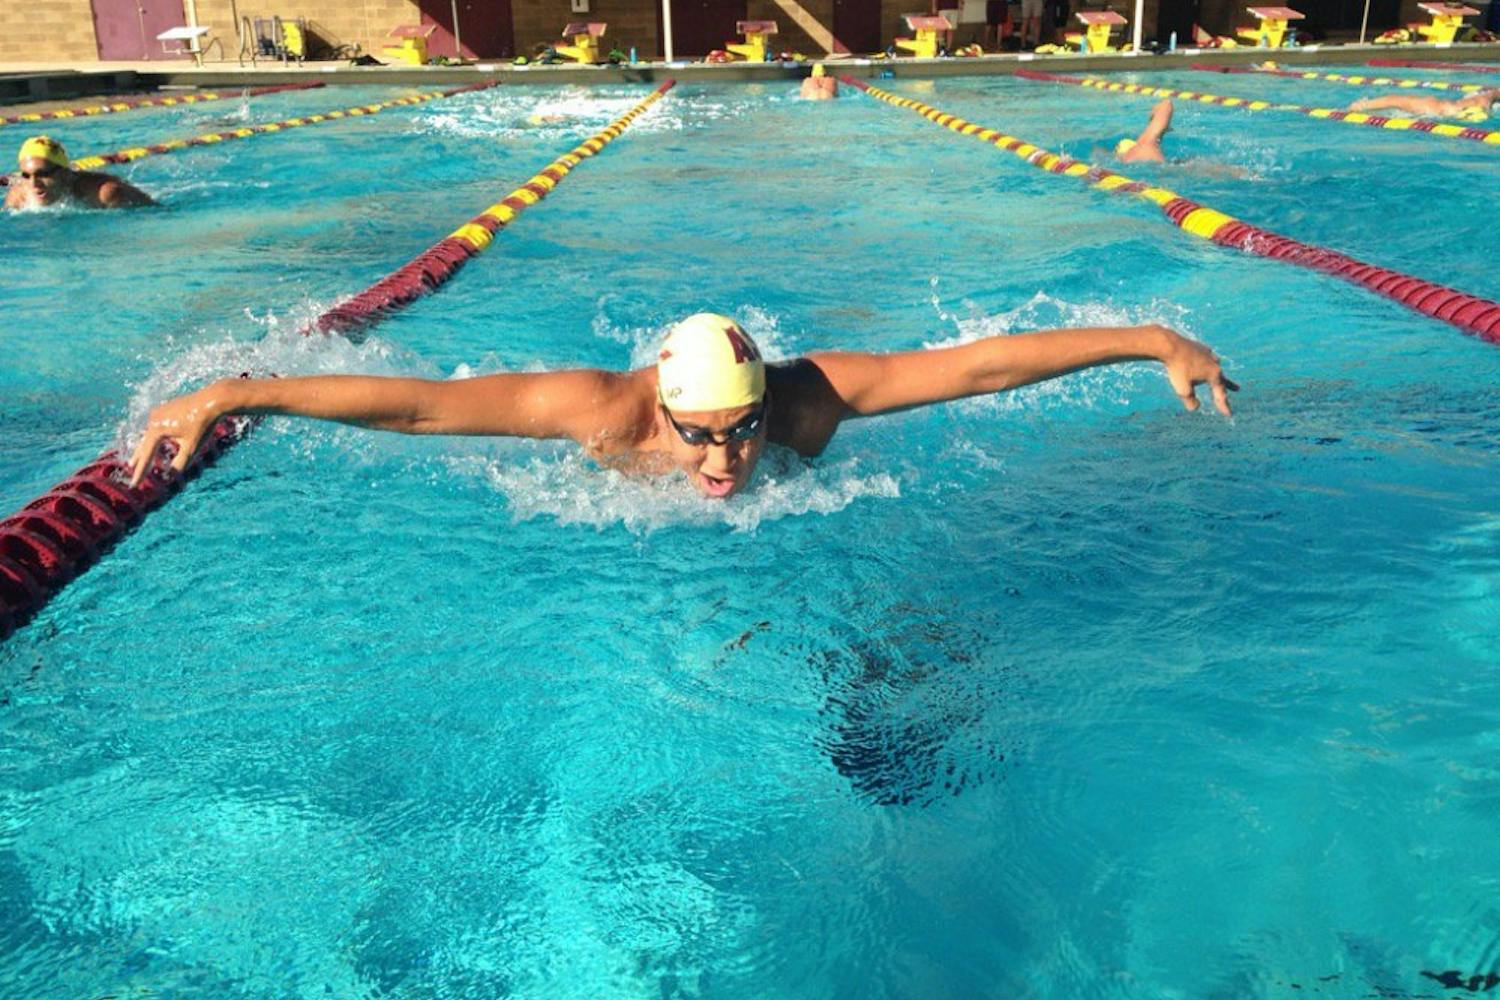 Patrick Park performs the butterfly stroke during practice on Thursday, Nov. 10, 2016.